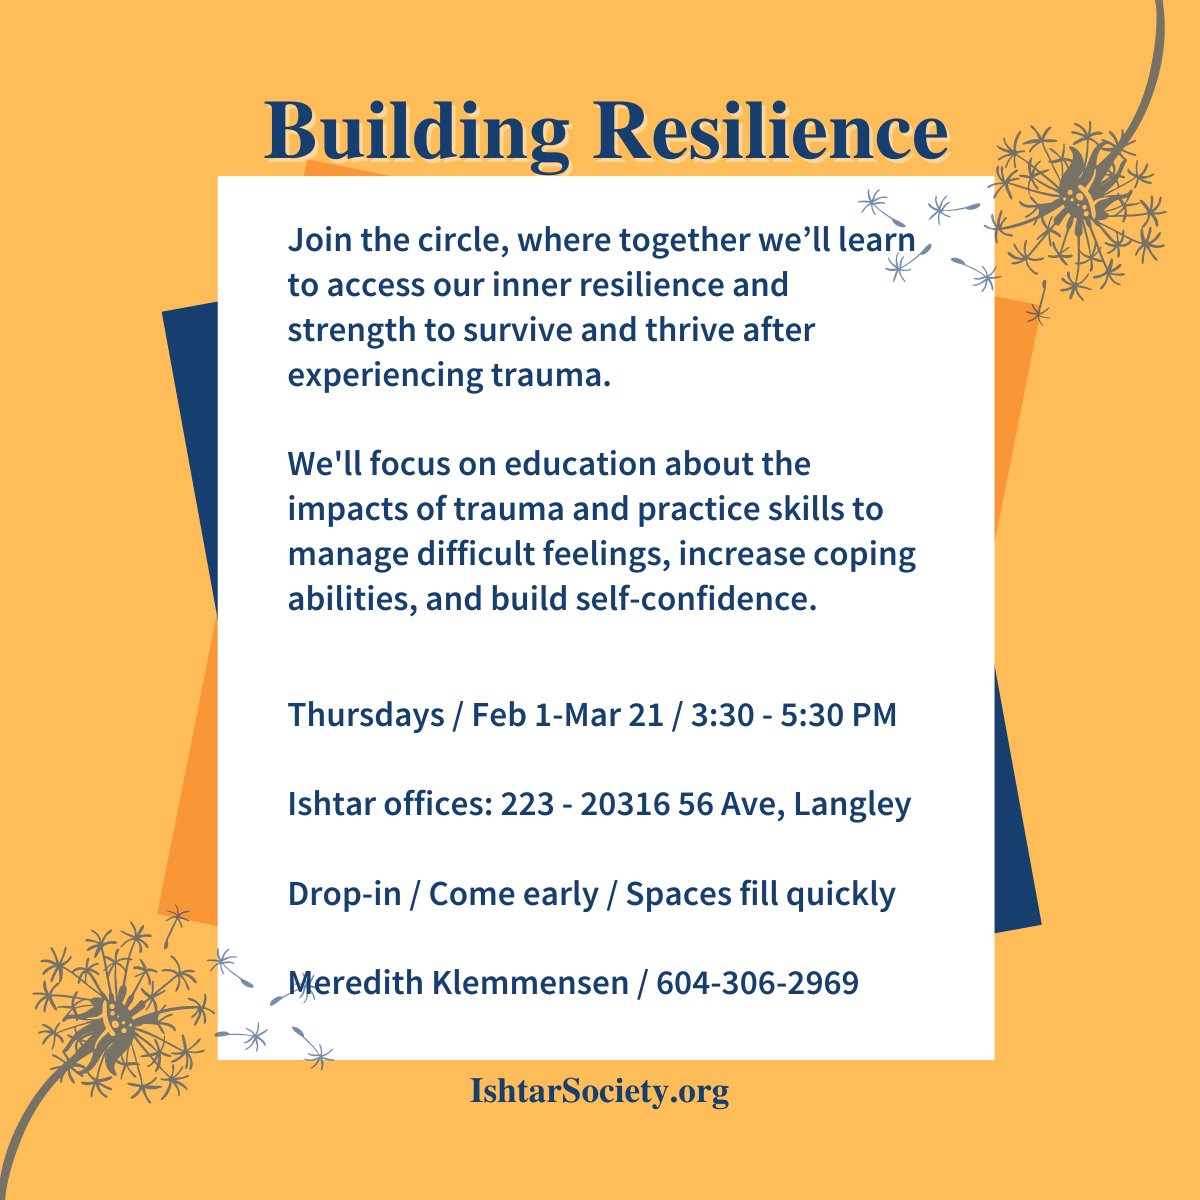 #BuildingResilience 2nd session TOMORROW!
🧡 Thurs, Feb 8
🧡 3:30-5:30PM
🧡 604-306-2969
#JoinTheCircle
Learn about trauma + skills to
*manage difficult feelings
*increase coping abilities +
*build self-confidence

IshtarSociety.org

#EndAbuse #LangleyBC #TheLangleys